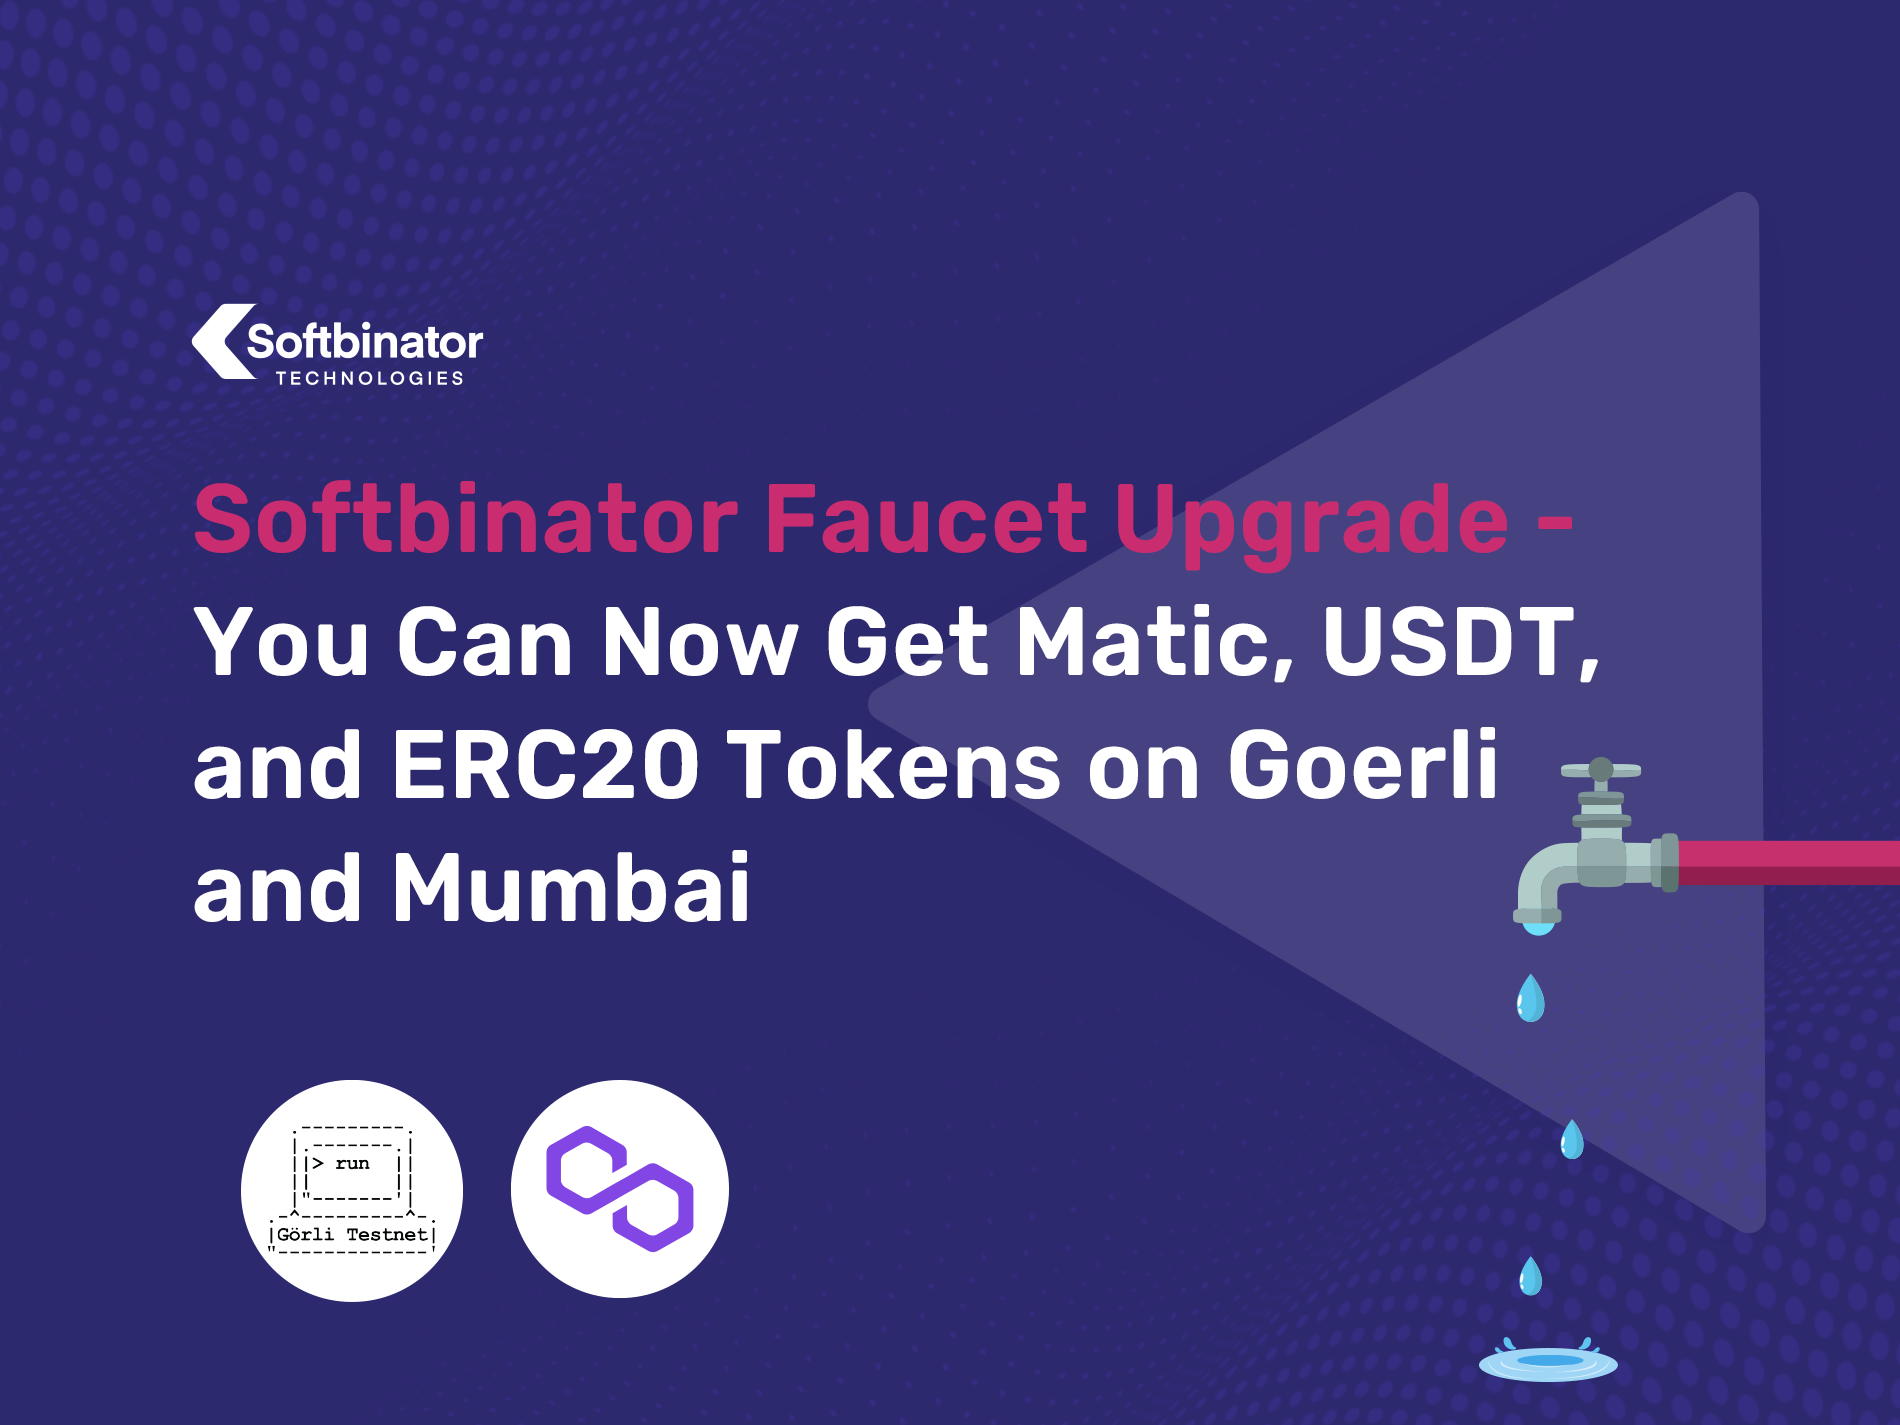 Softbinator Faucet Upgrade – You Can Now Get Matic, USDT, and ERC20 Tokens on Goerli and Mumbai